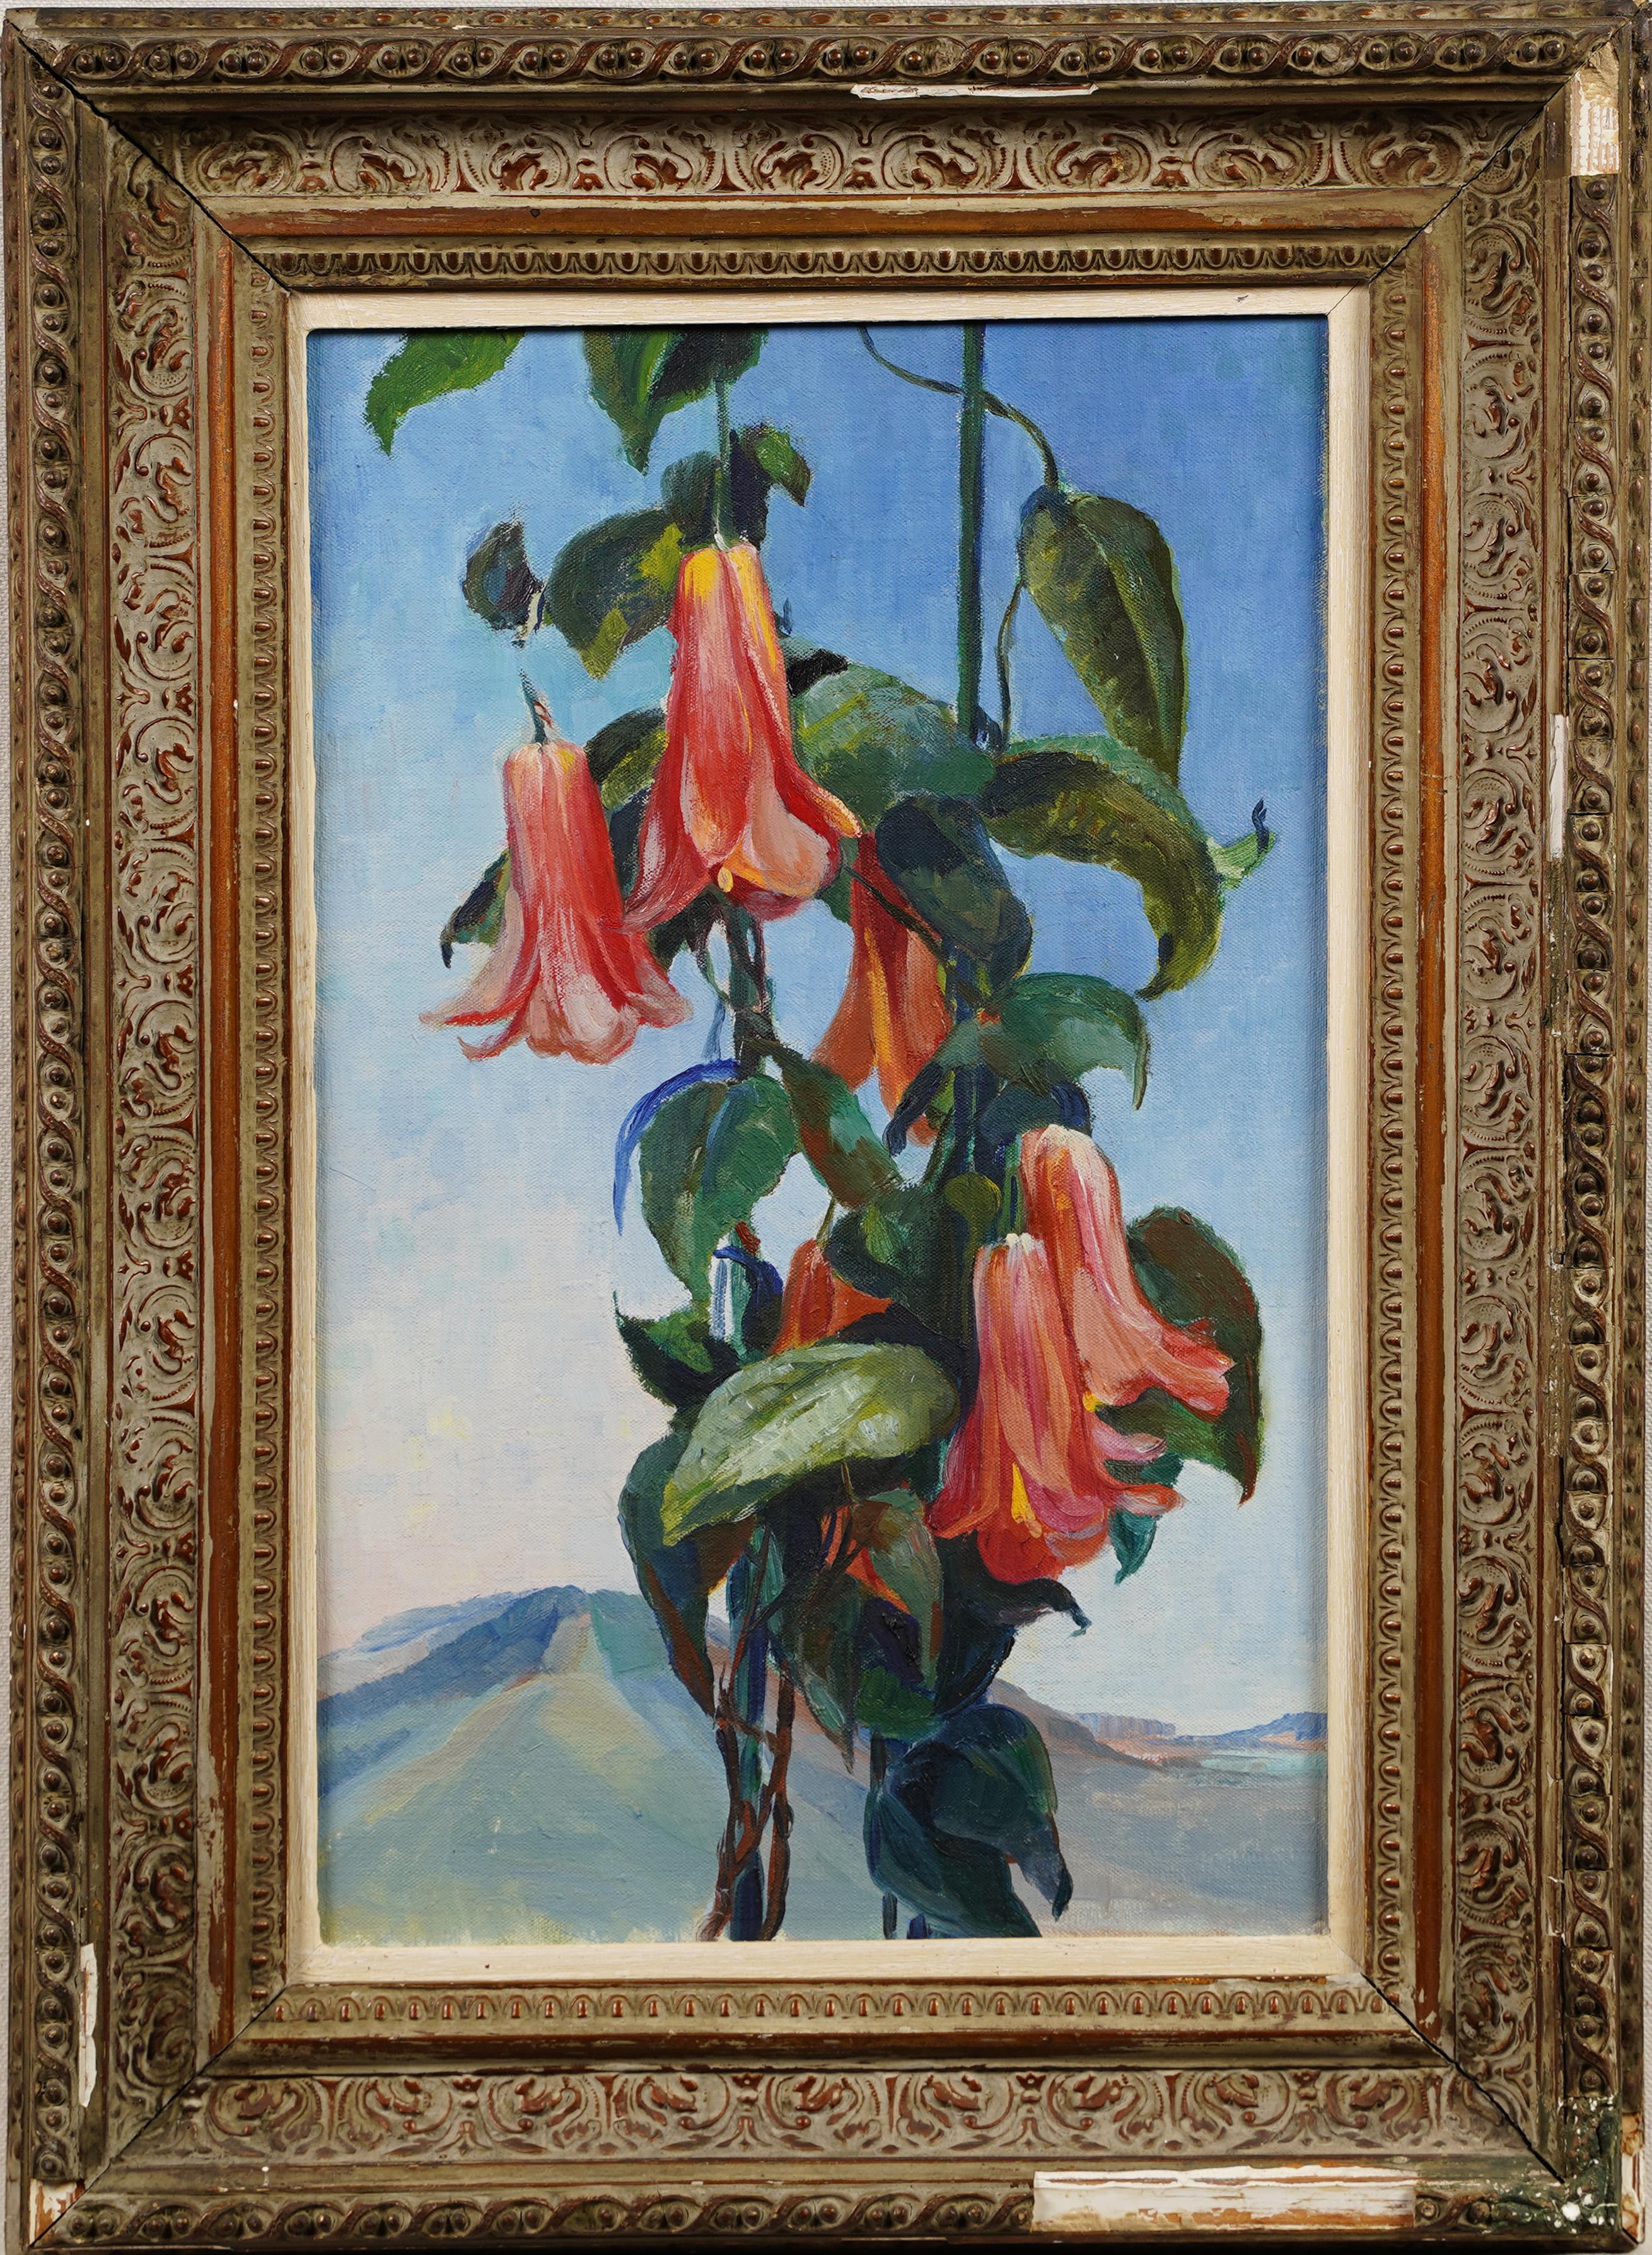 Unknown Still-Life Painting - The Mountain Flower, American School Antique Still Life Landscape Oil Painting